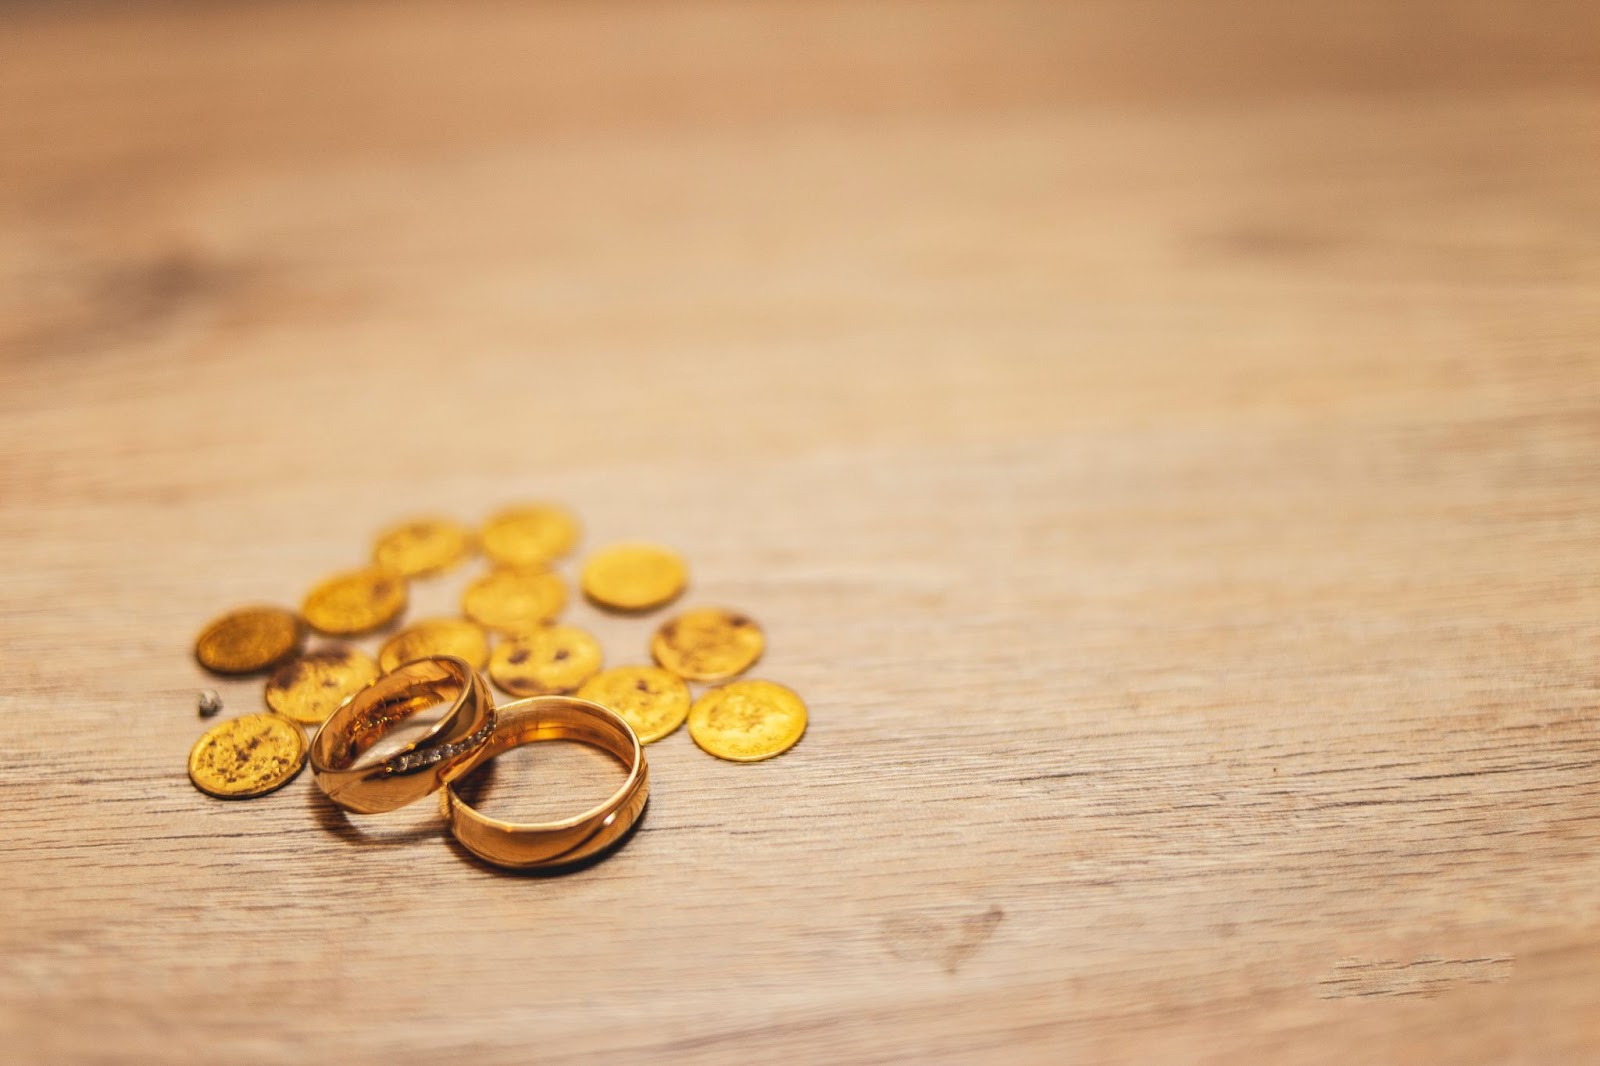 Two yellow gold wedding bands sit on a table among a pile of coins